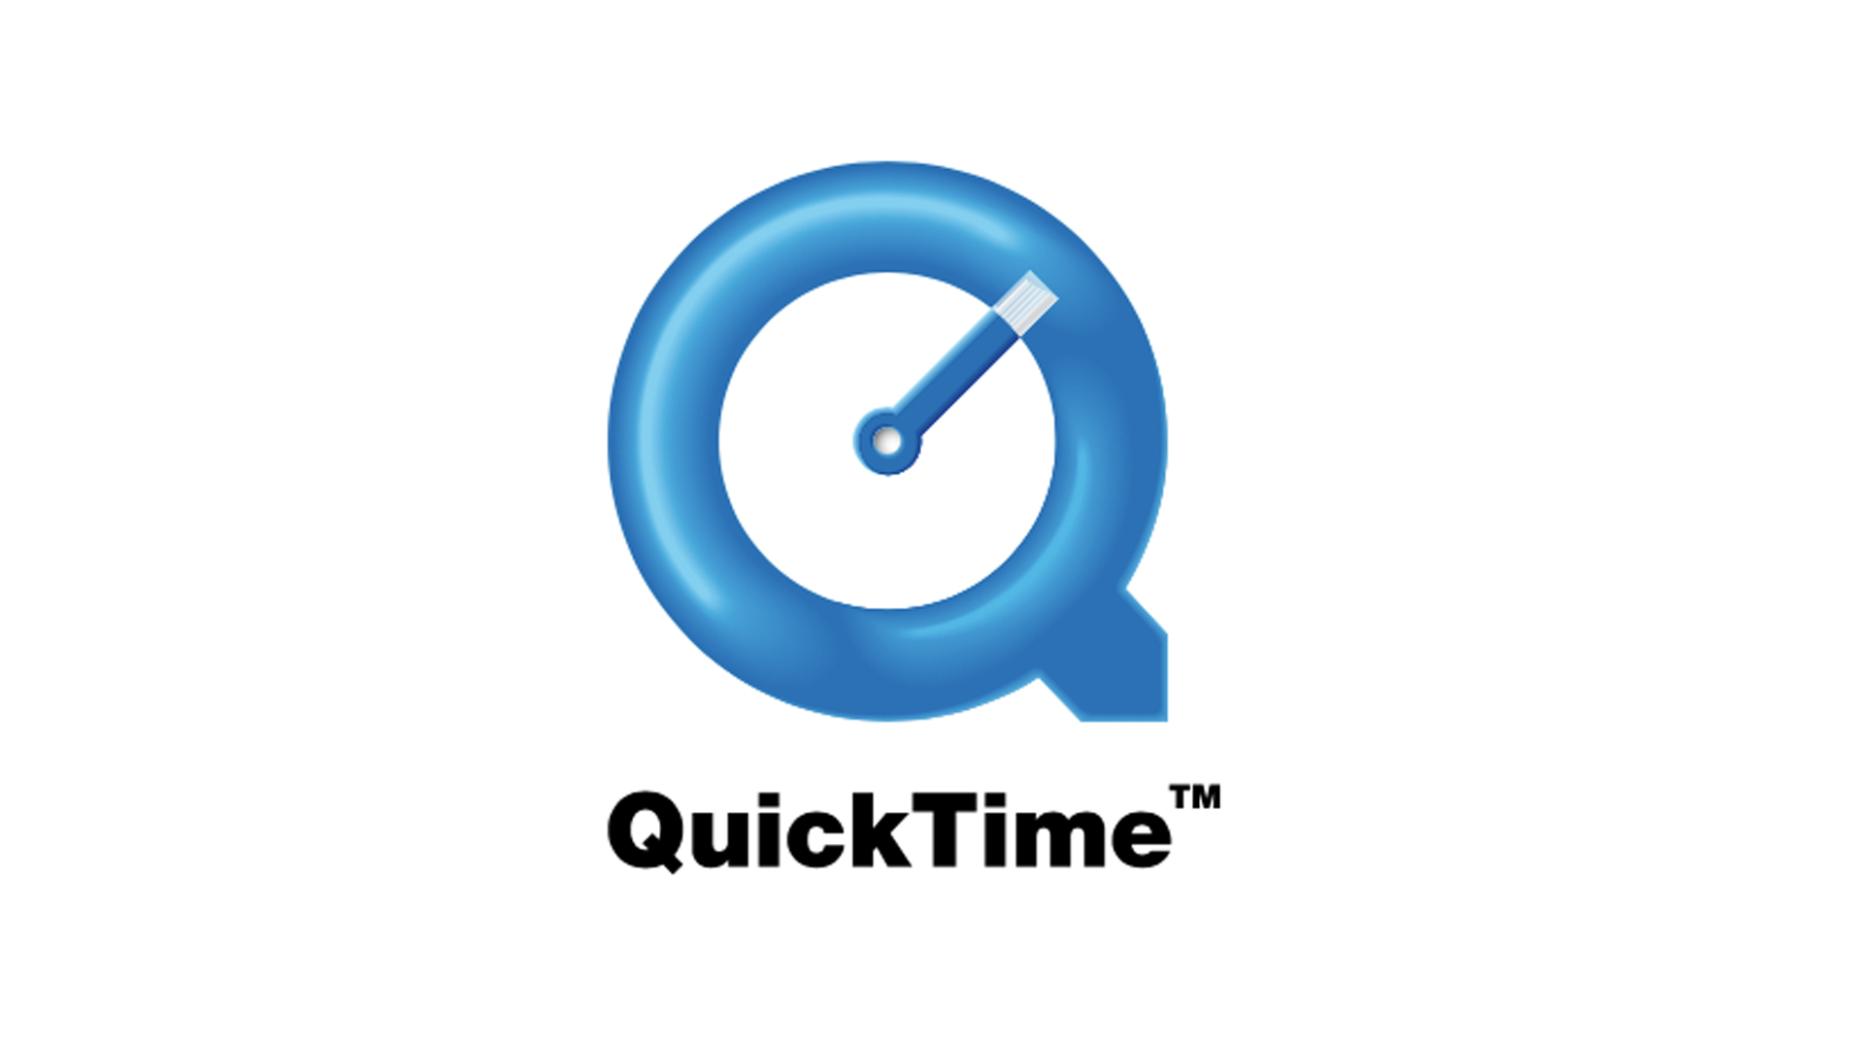 Quick player. QUICKTIME. QUICKTIME Формат. QUICKTIME значок. QUICKTIME Player лого.